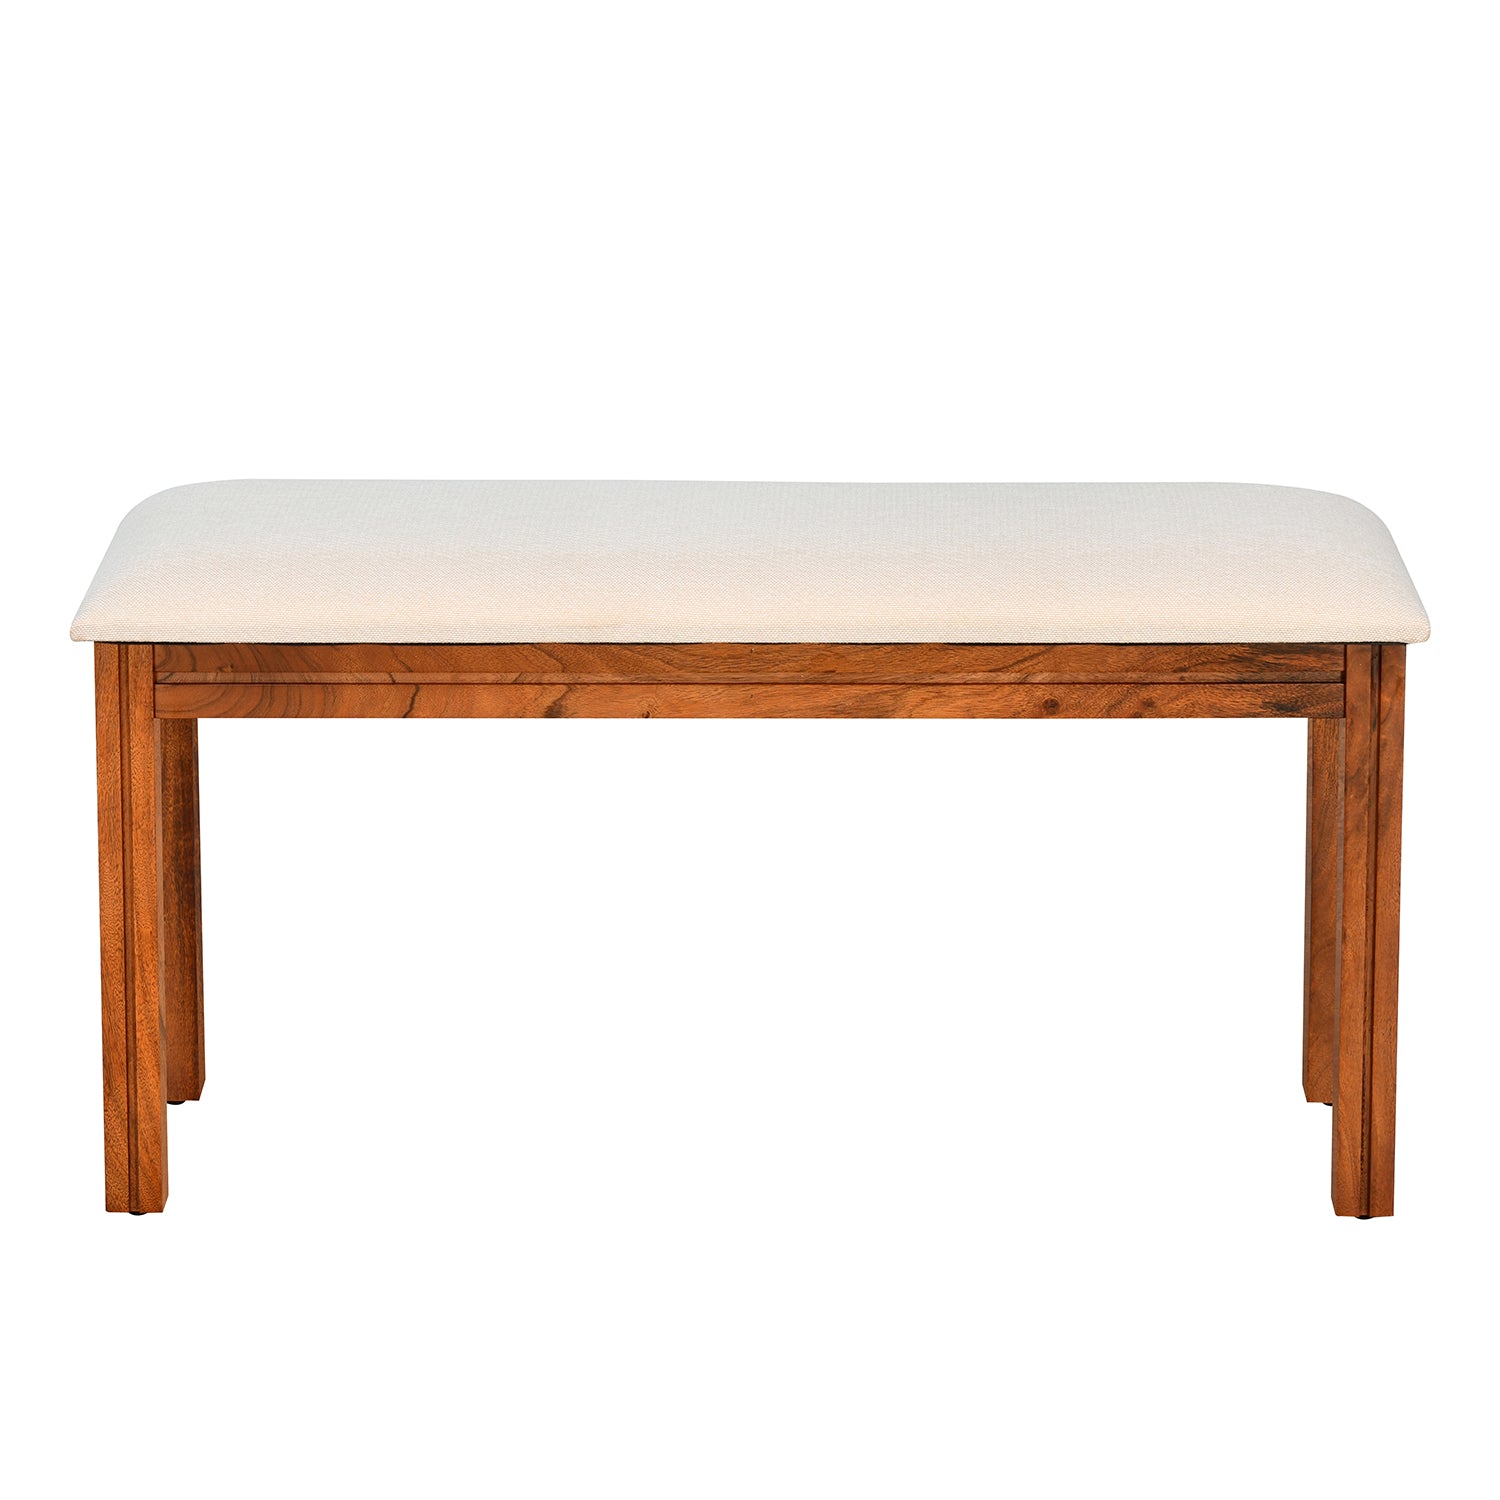 Cera 4 Seater Solid Wood Dining Bench (Honey Brown)